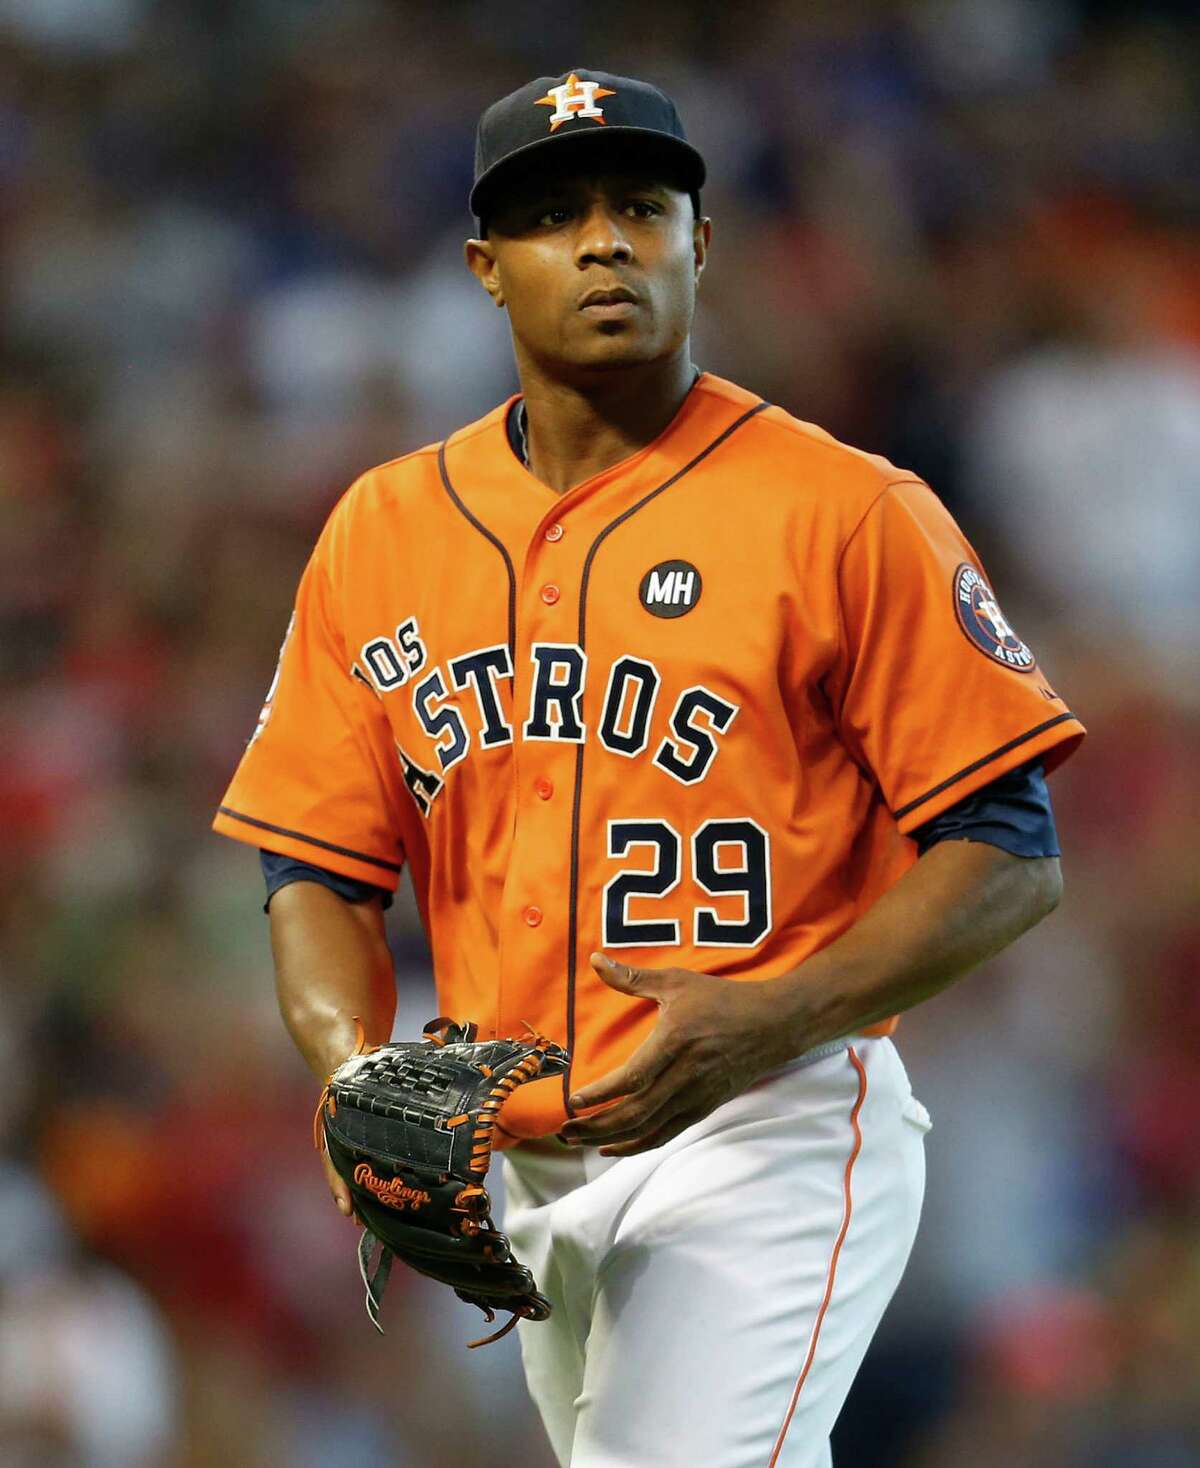 The Astros paid a hefty price in talent for reliever Ken Giles, left, to don their uniform and likely anchor the back of their bullpen. Plus, proven reliever Tony Sipp received a three-year, $18 million deal to return.